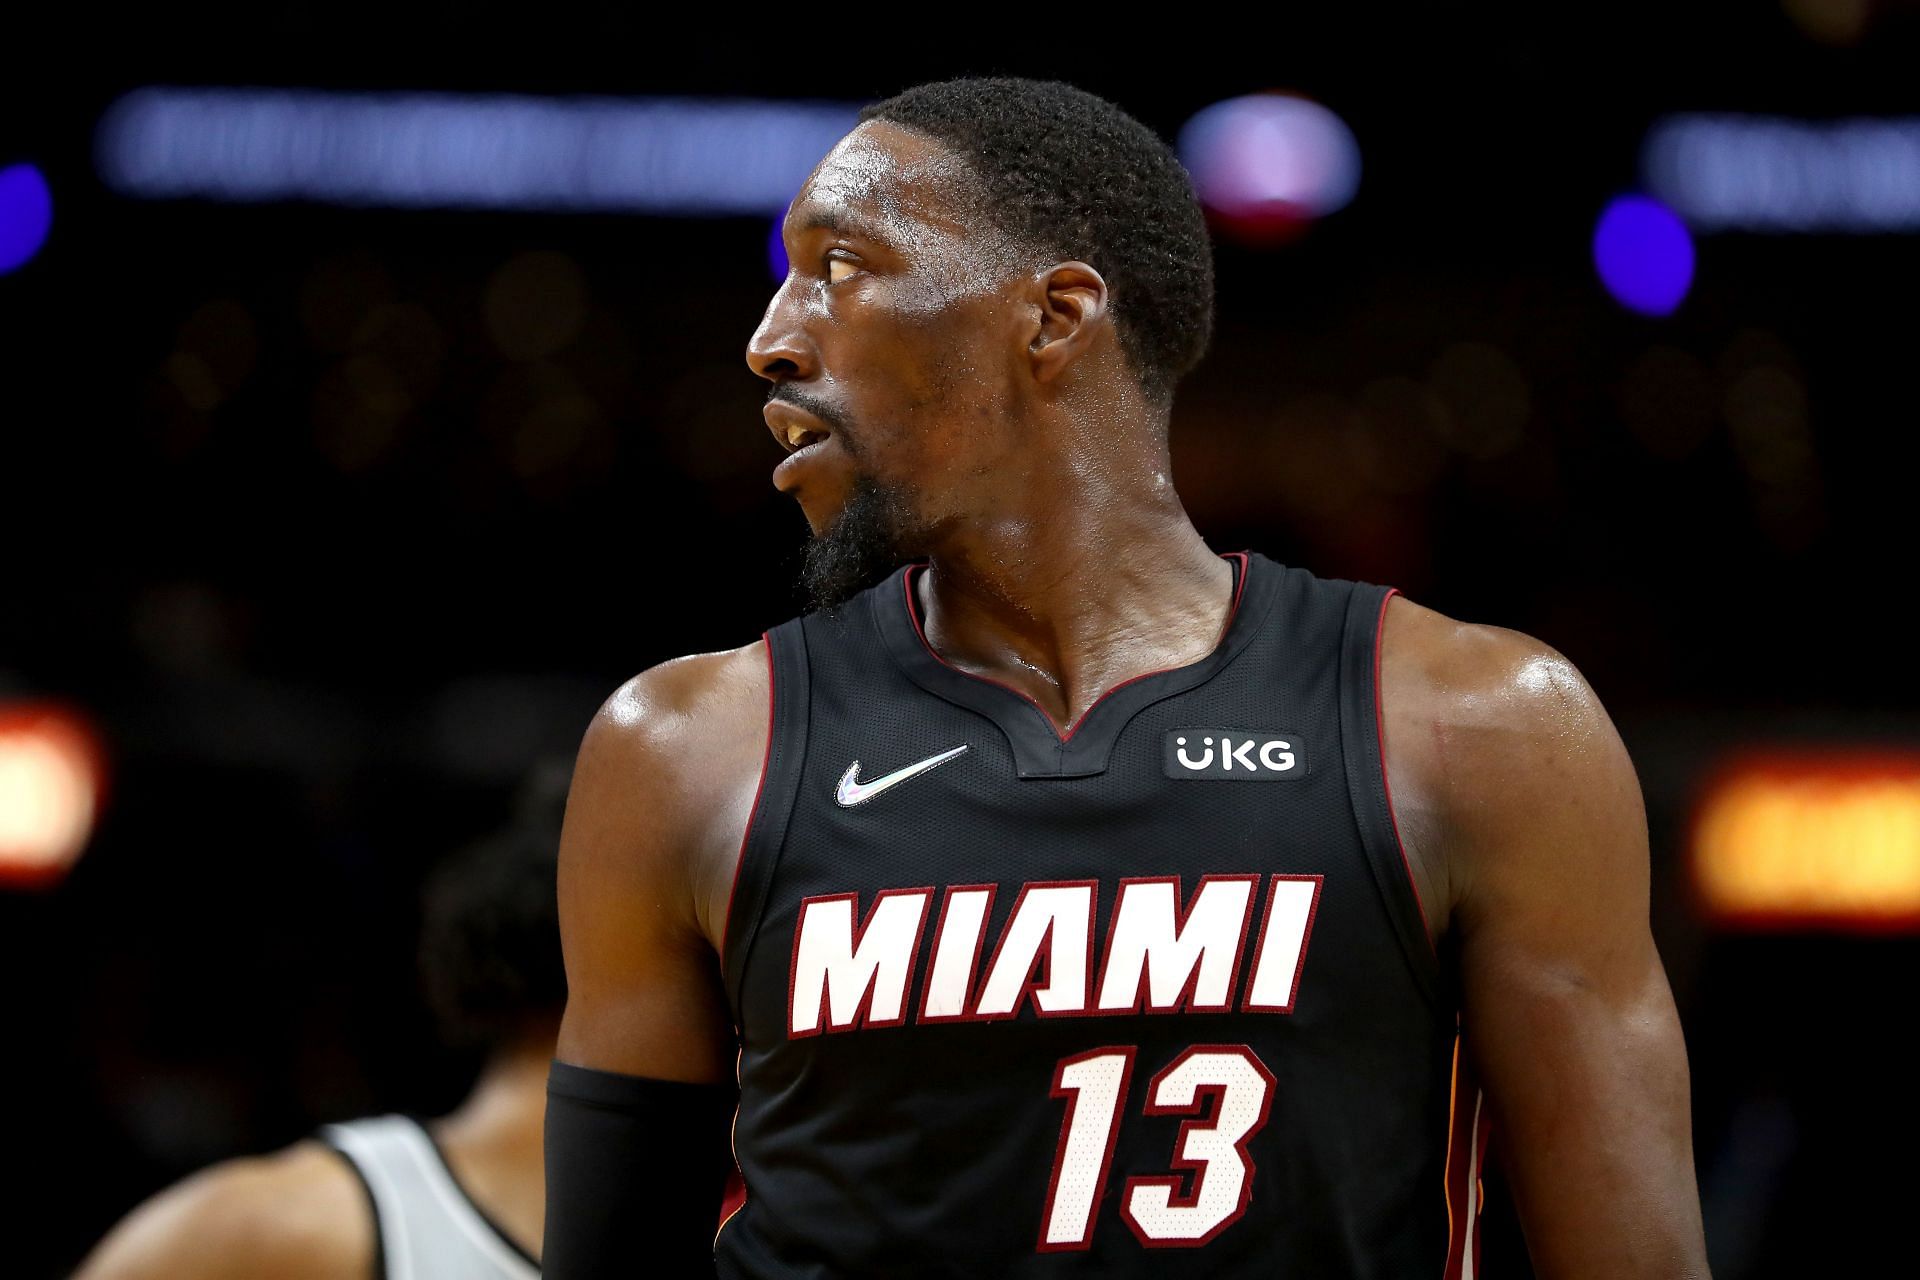 Bam Adebayo and the Miami Heat look to clinch the series Tuesday.